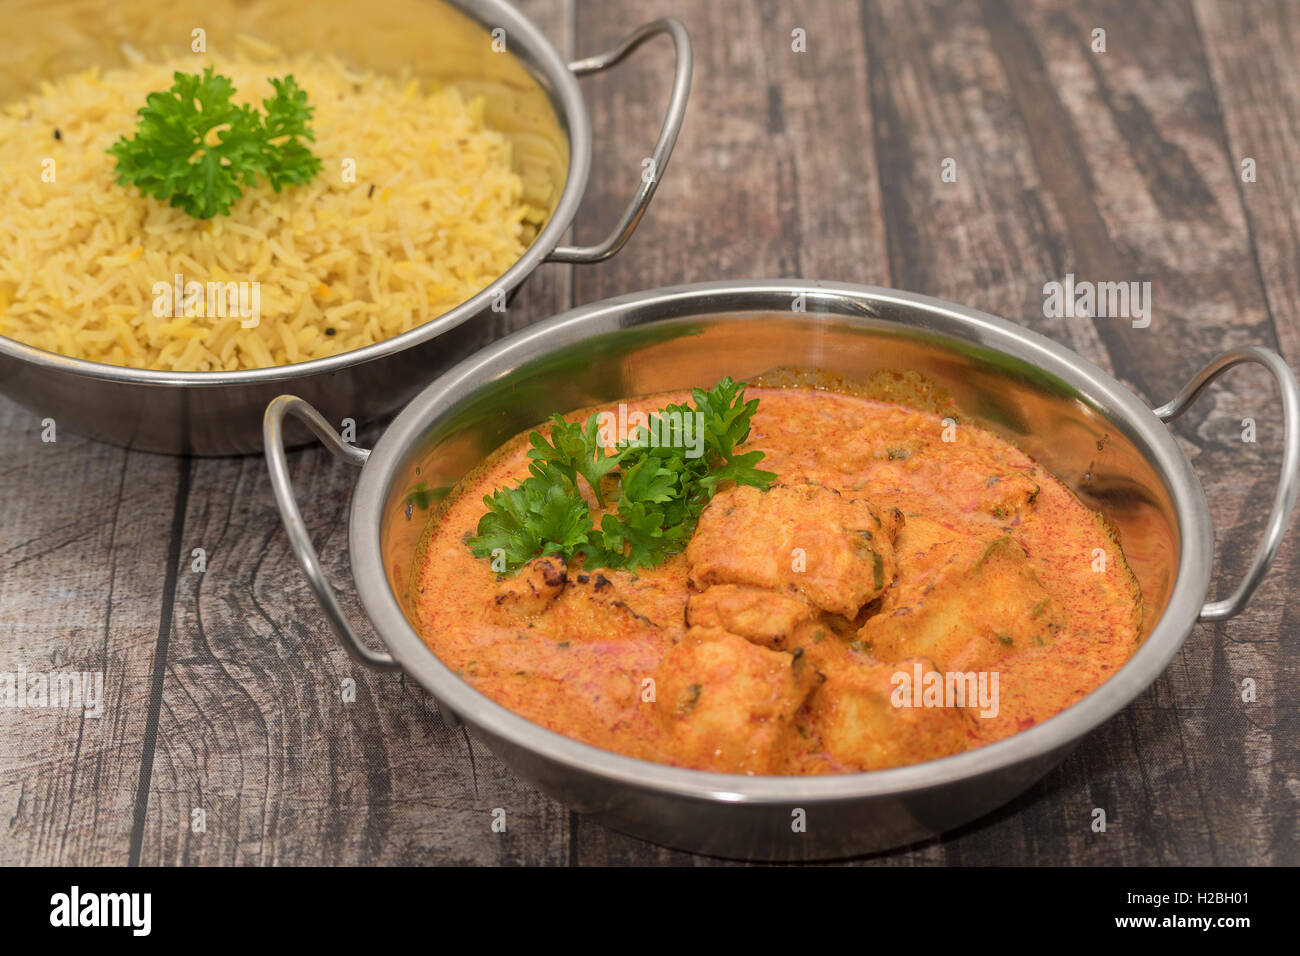 Chicken Tikka Masala - a classic medium spiced Indian curry with pieces of chargrilled chicken in a rich creamy masala sauce Stock Photo